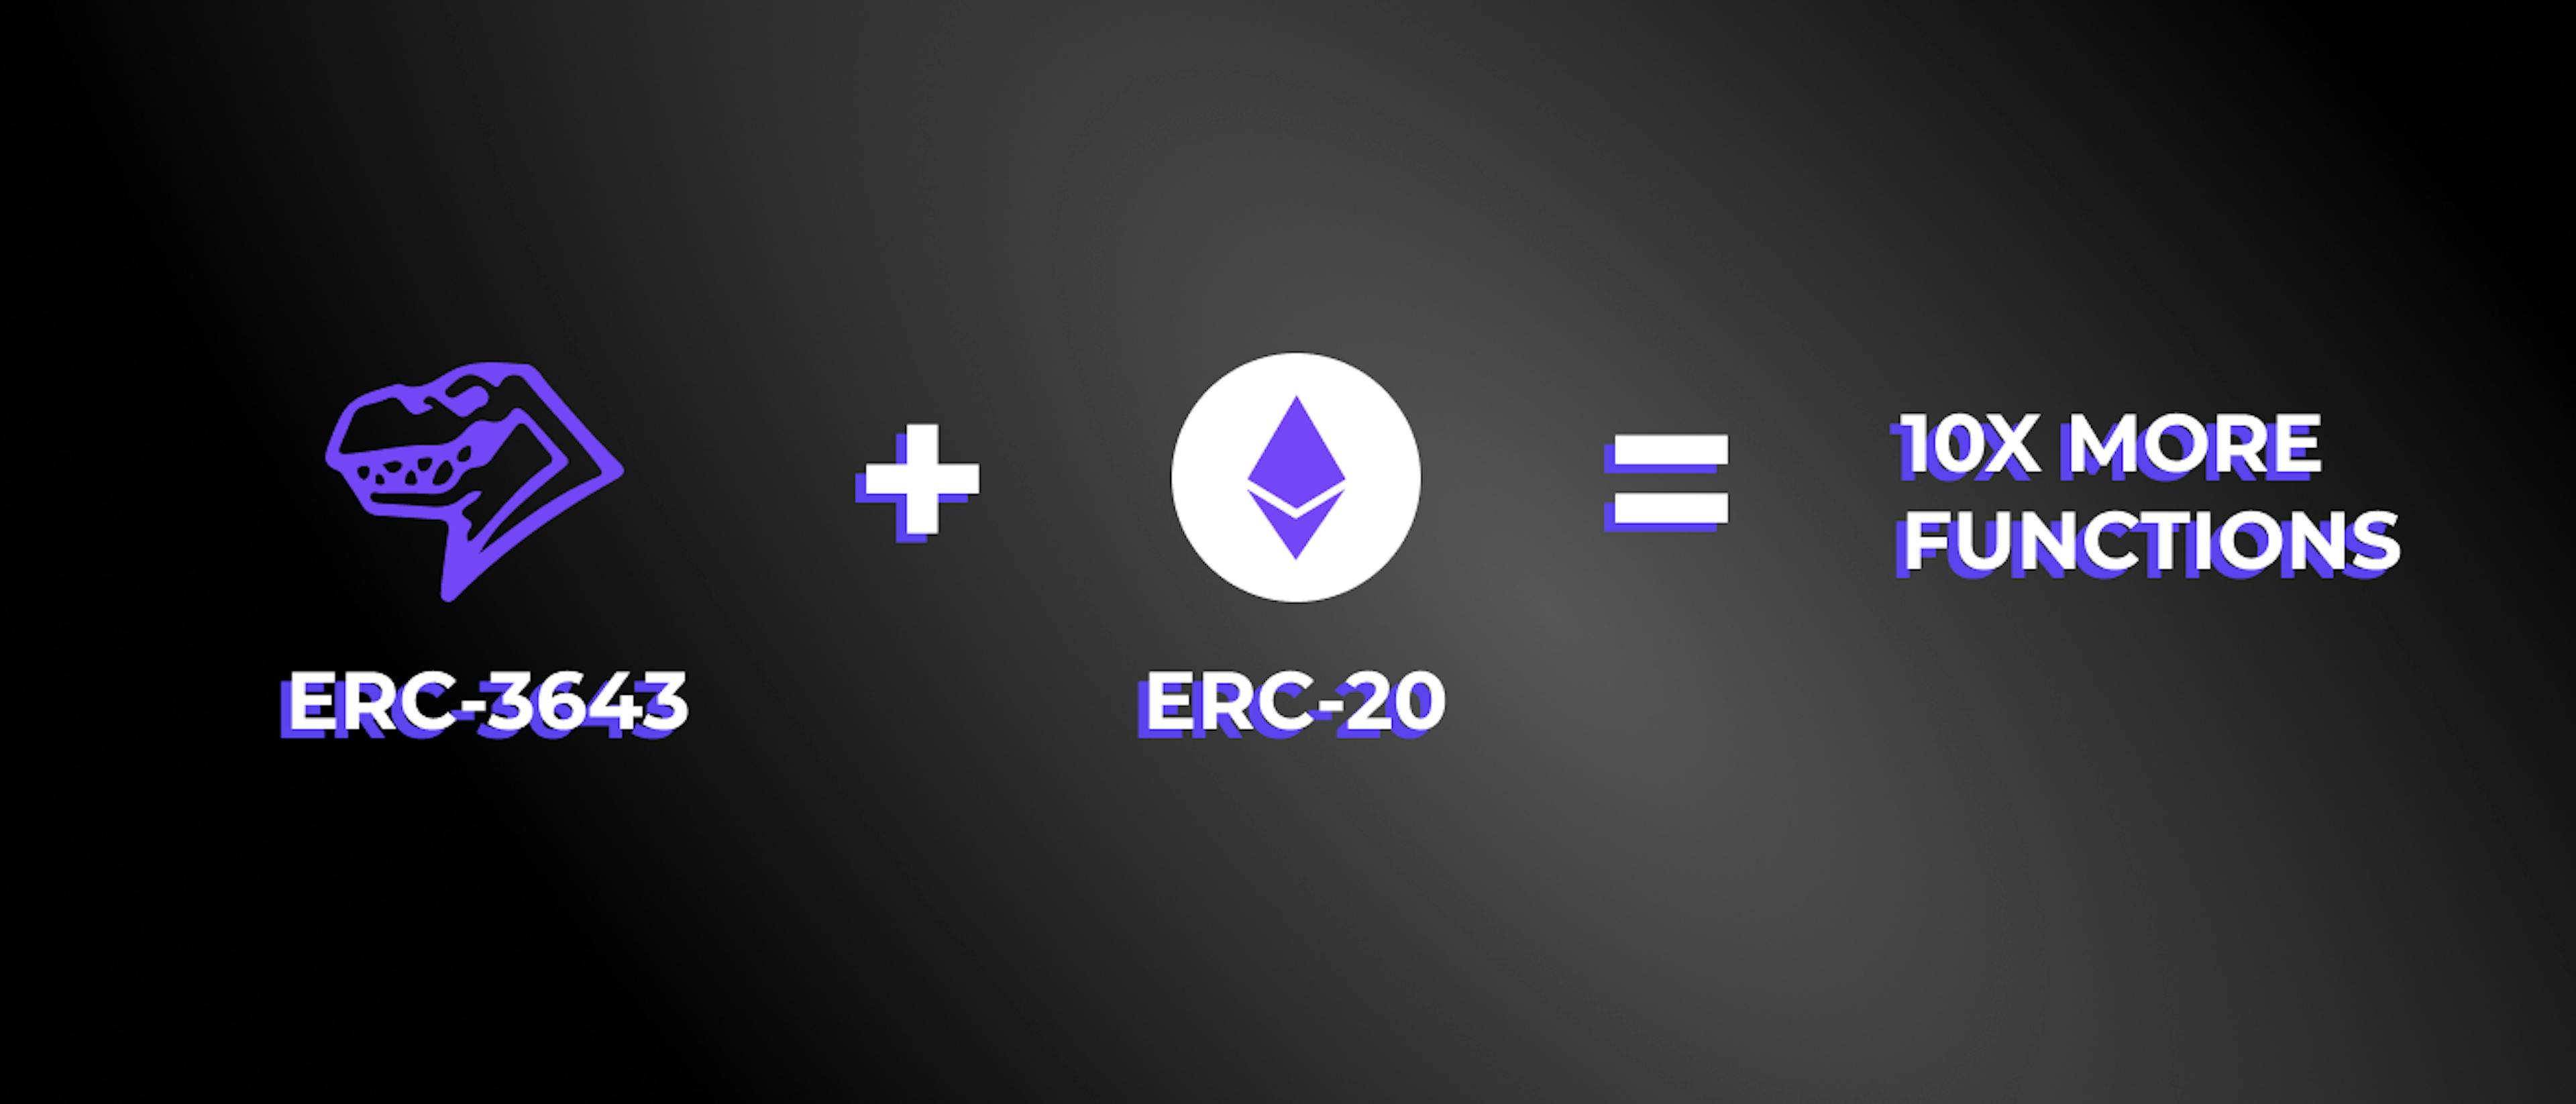 ERC-3643 is another version of ERC-20